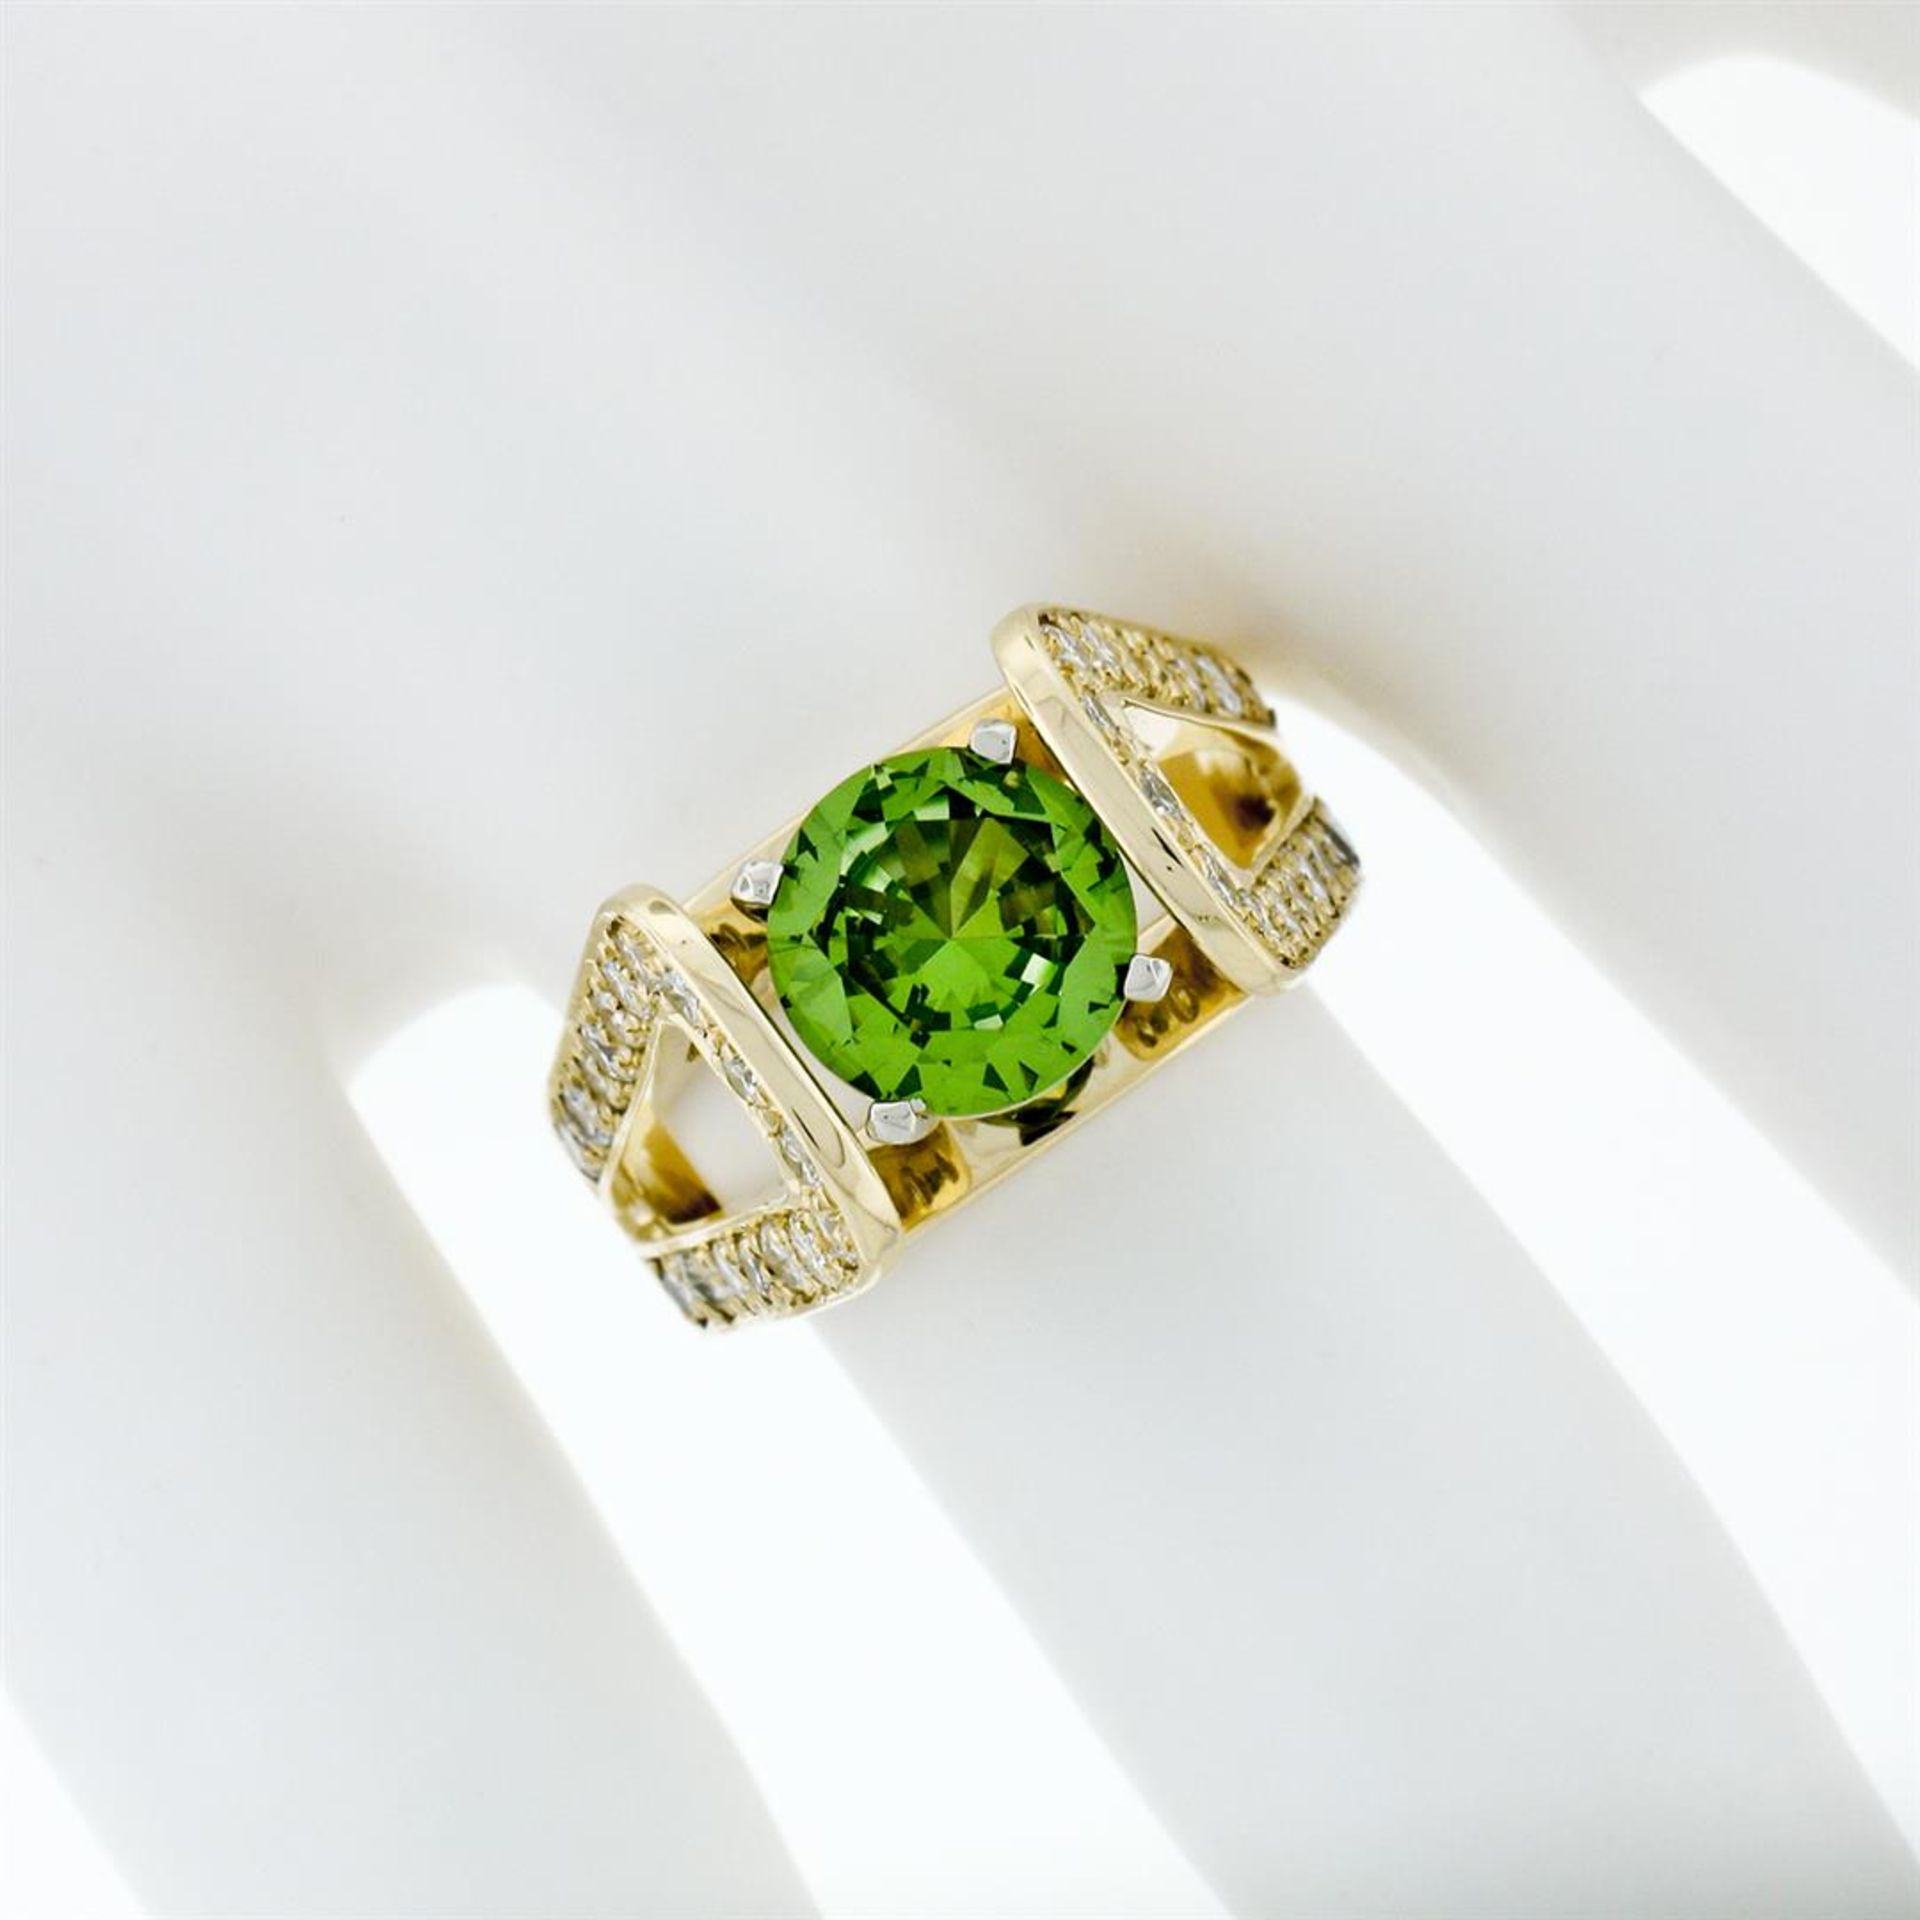 14k Yellow Gold 3.0ctw Round Peridot Solitaire & Ideal Cut Diamond Cocktail Ring - Image 3 of 9